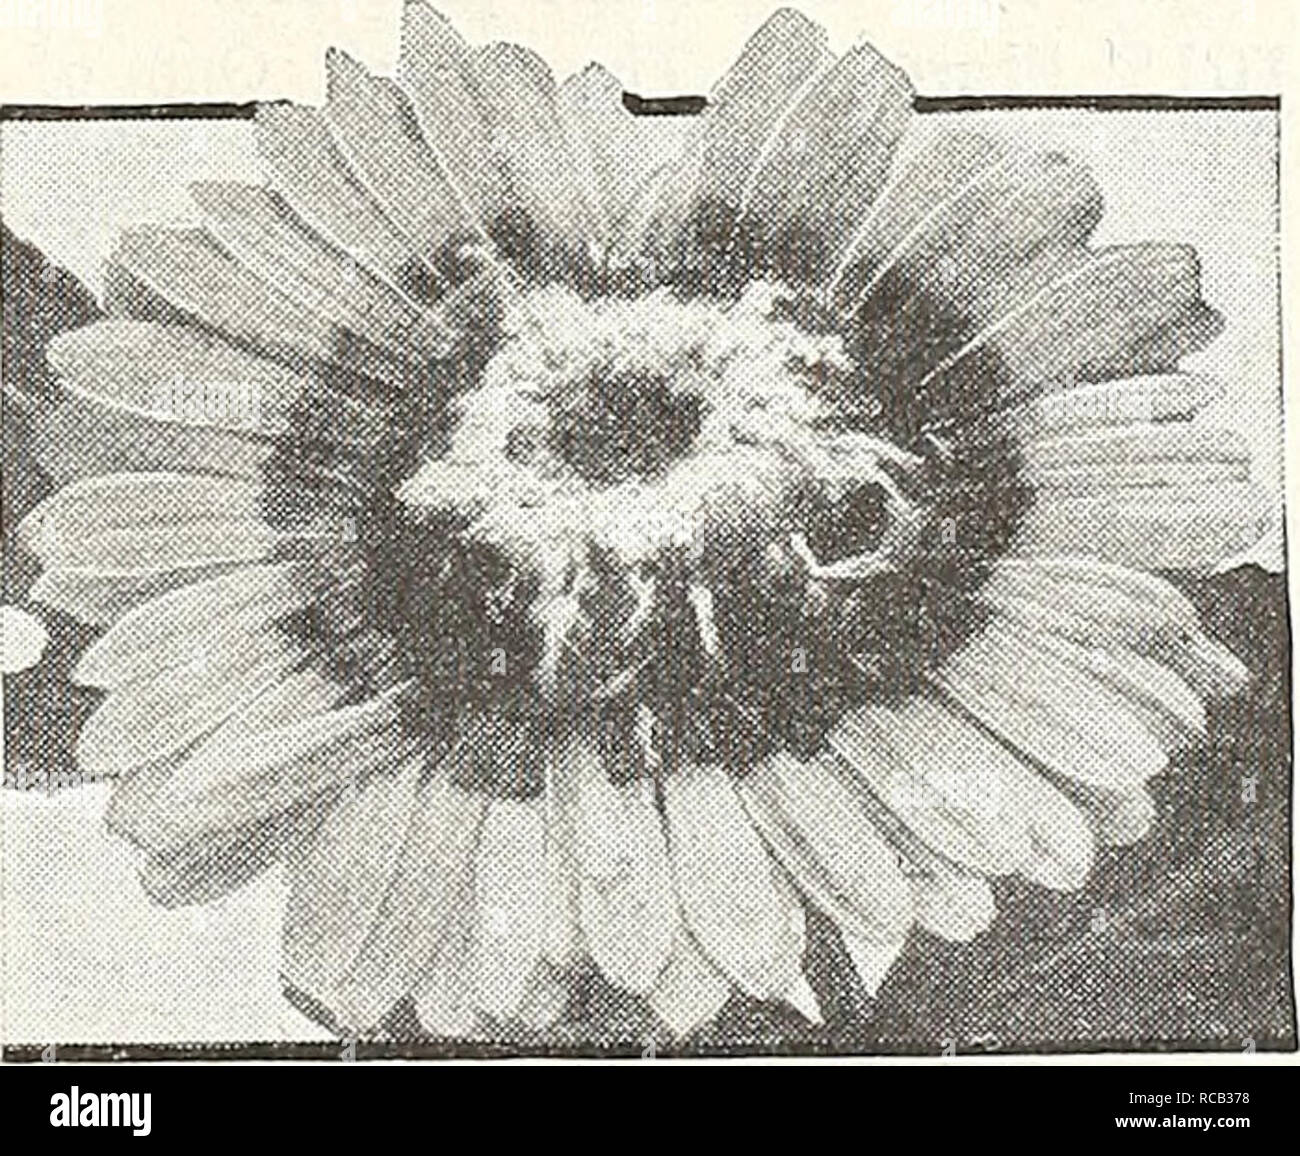 . Dreer's 1948 - our 110th year. Seeds Catalogs; Nursery stock Catalogs; Gardening Equipment and supplies Catalogs; Flowers Seeds Catalogs; Vegetables Seeds Catalogs; Fruit Seeds Catalogs. Tithonia speciosa, Early-Flowering Tithonia speeiosa ® Mexican Suiifloiver Golden Flower of the Incas 4288 Avalon Earliest Hybrids Mixed. Stately plants, 6 ft. high, carrying during the autumn showy long- stemmed blooms ranging from orange topaz to burnished scarlet- flame. Pkt. 25c; large pkt. 7Sc. 4289 Early-Flowering. Intensely bril- liant, golden-orange flowers borne profusely on stately 6-ft. plants dur Stock Photo